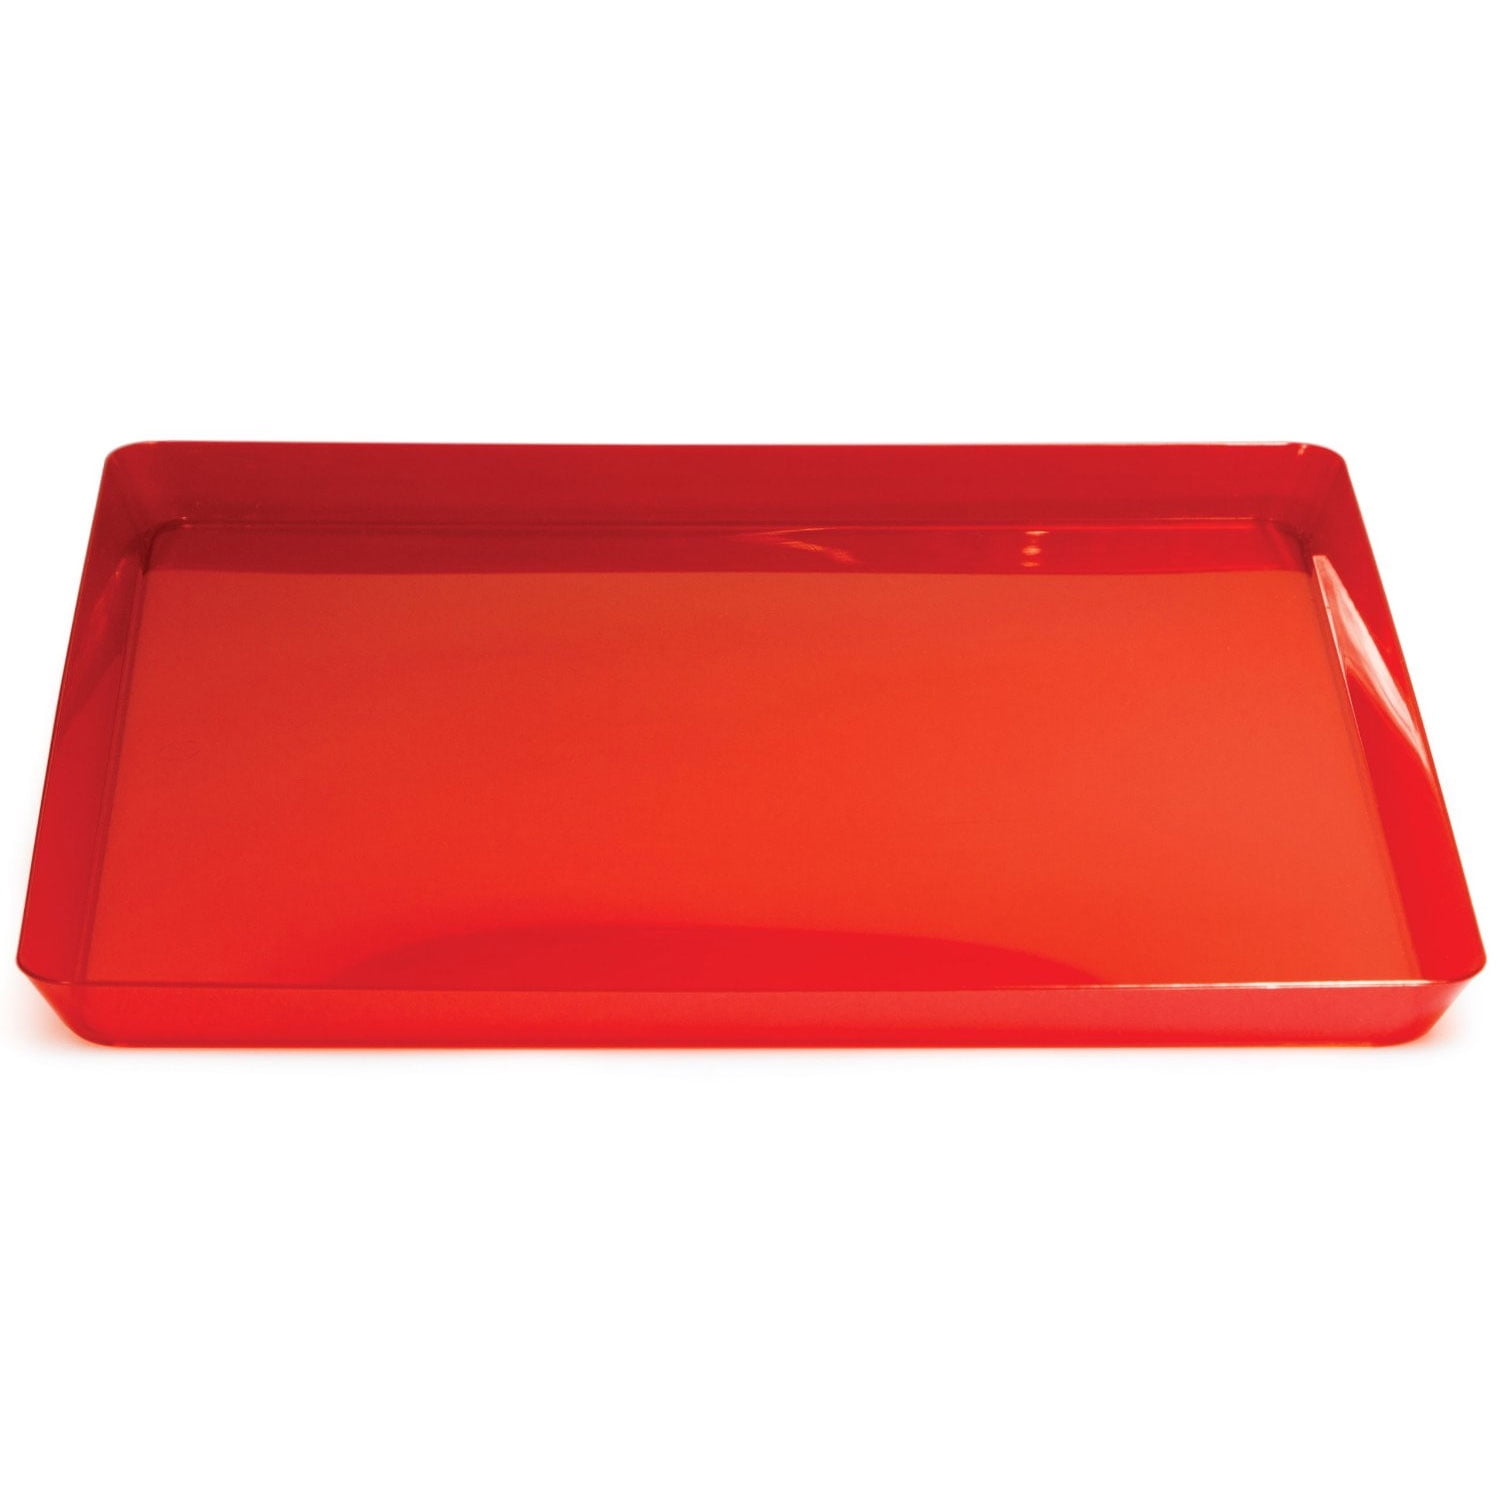 Texas Ware Red Cafeteria Trays Set of Four 4 2 Rectangle 2 Square